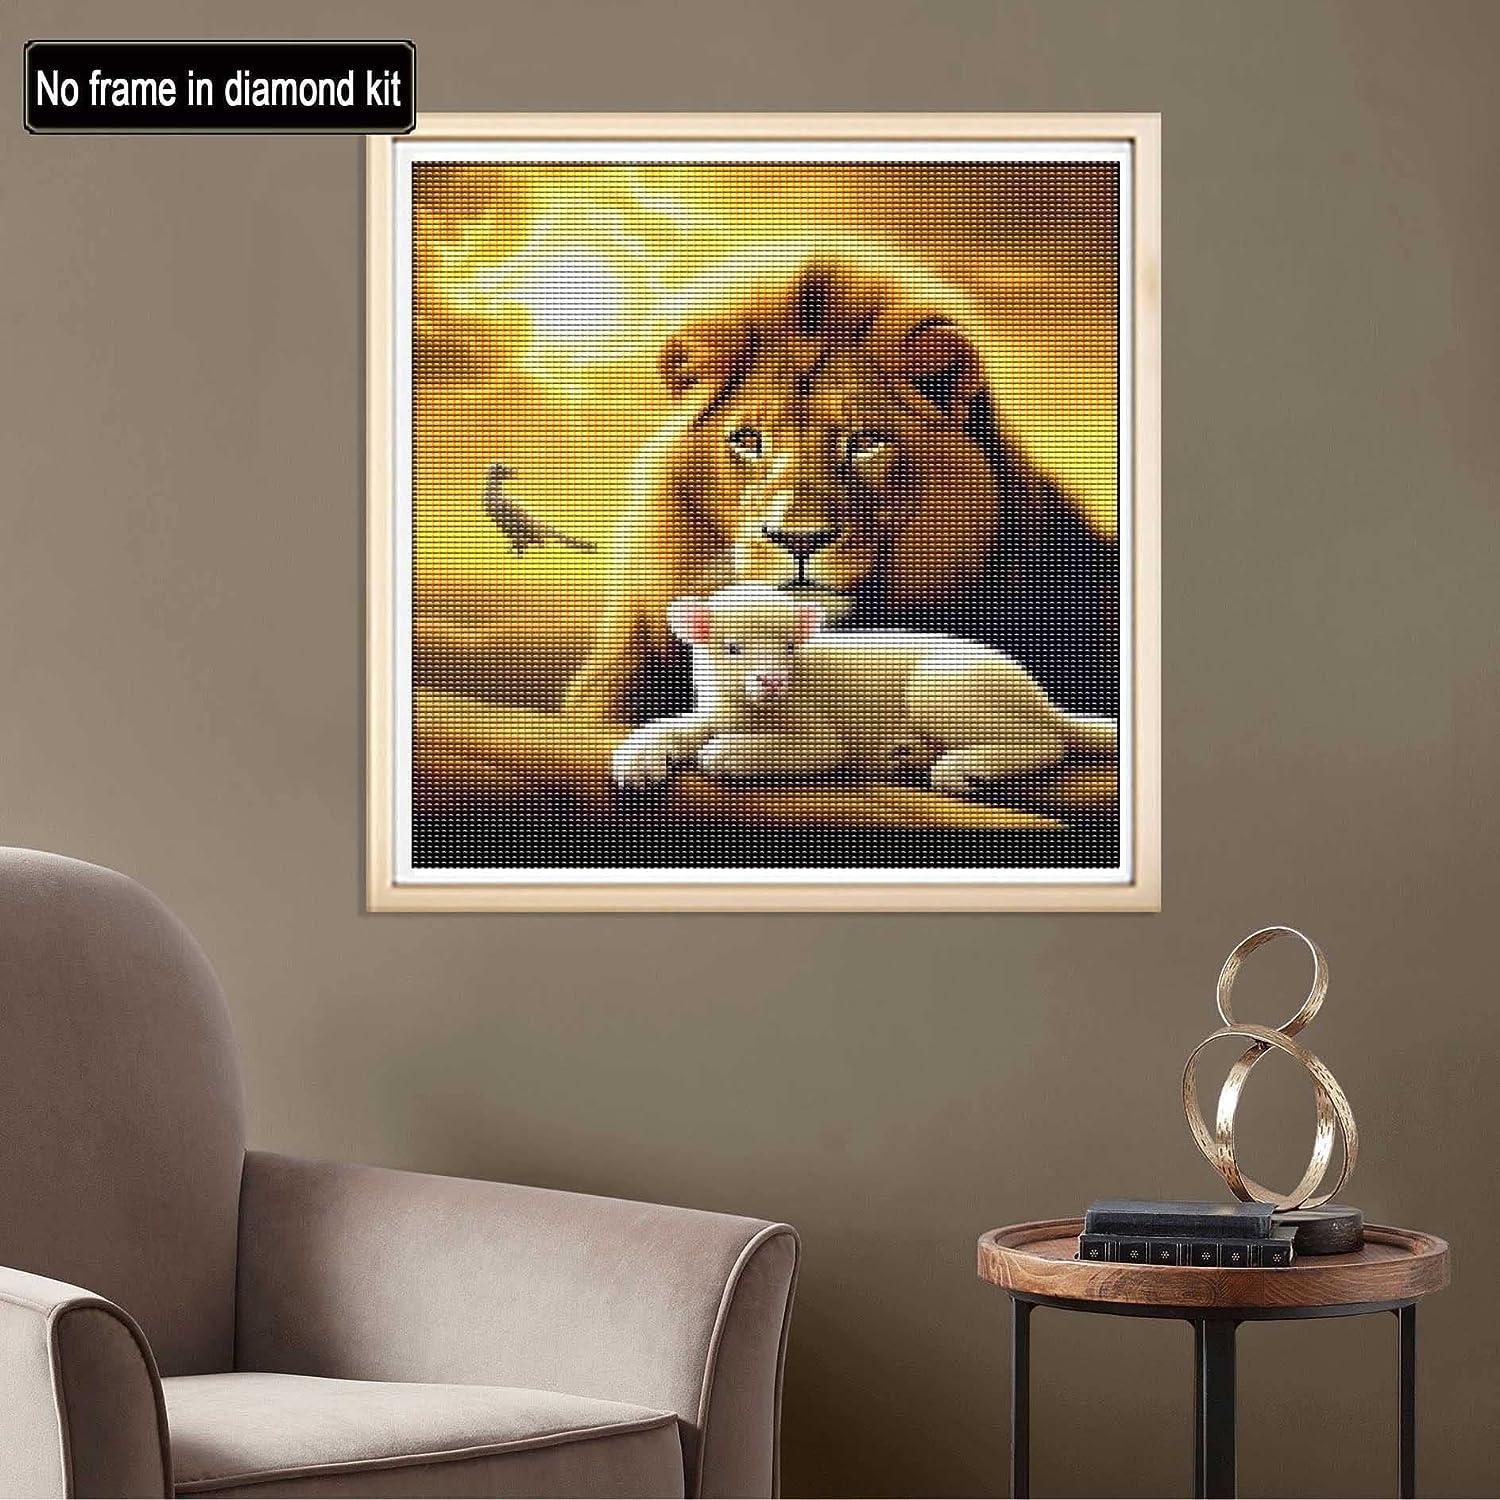 Cat Diamond Painting Kit For Adults 5d Diamond Art Kit Animal Rhinestone  Painting Gift For Home Wall Decoration